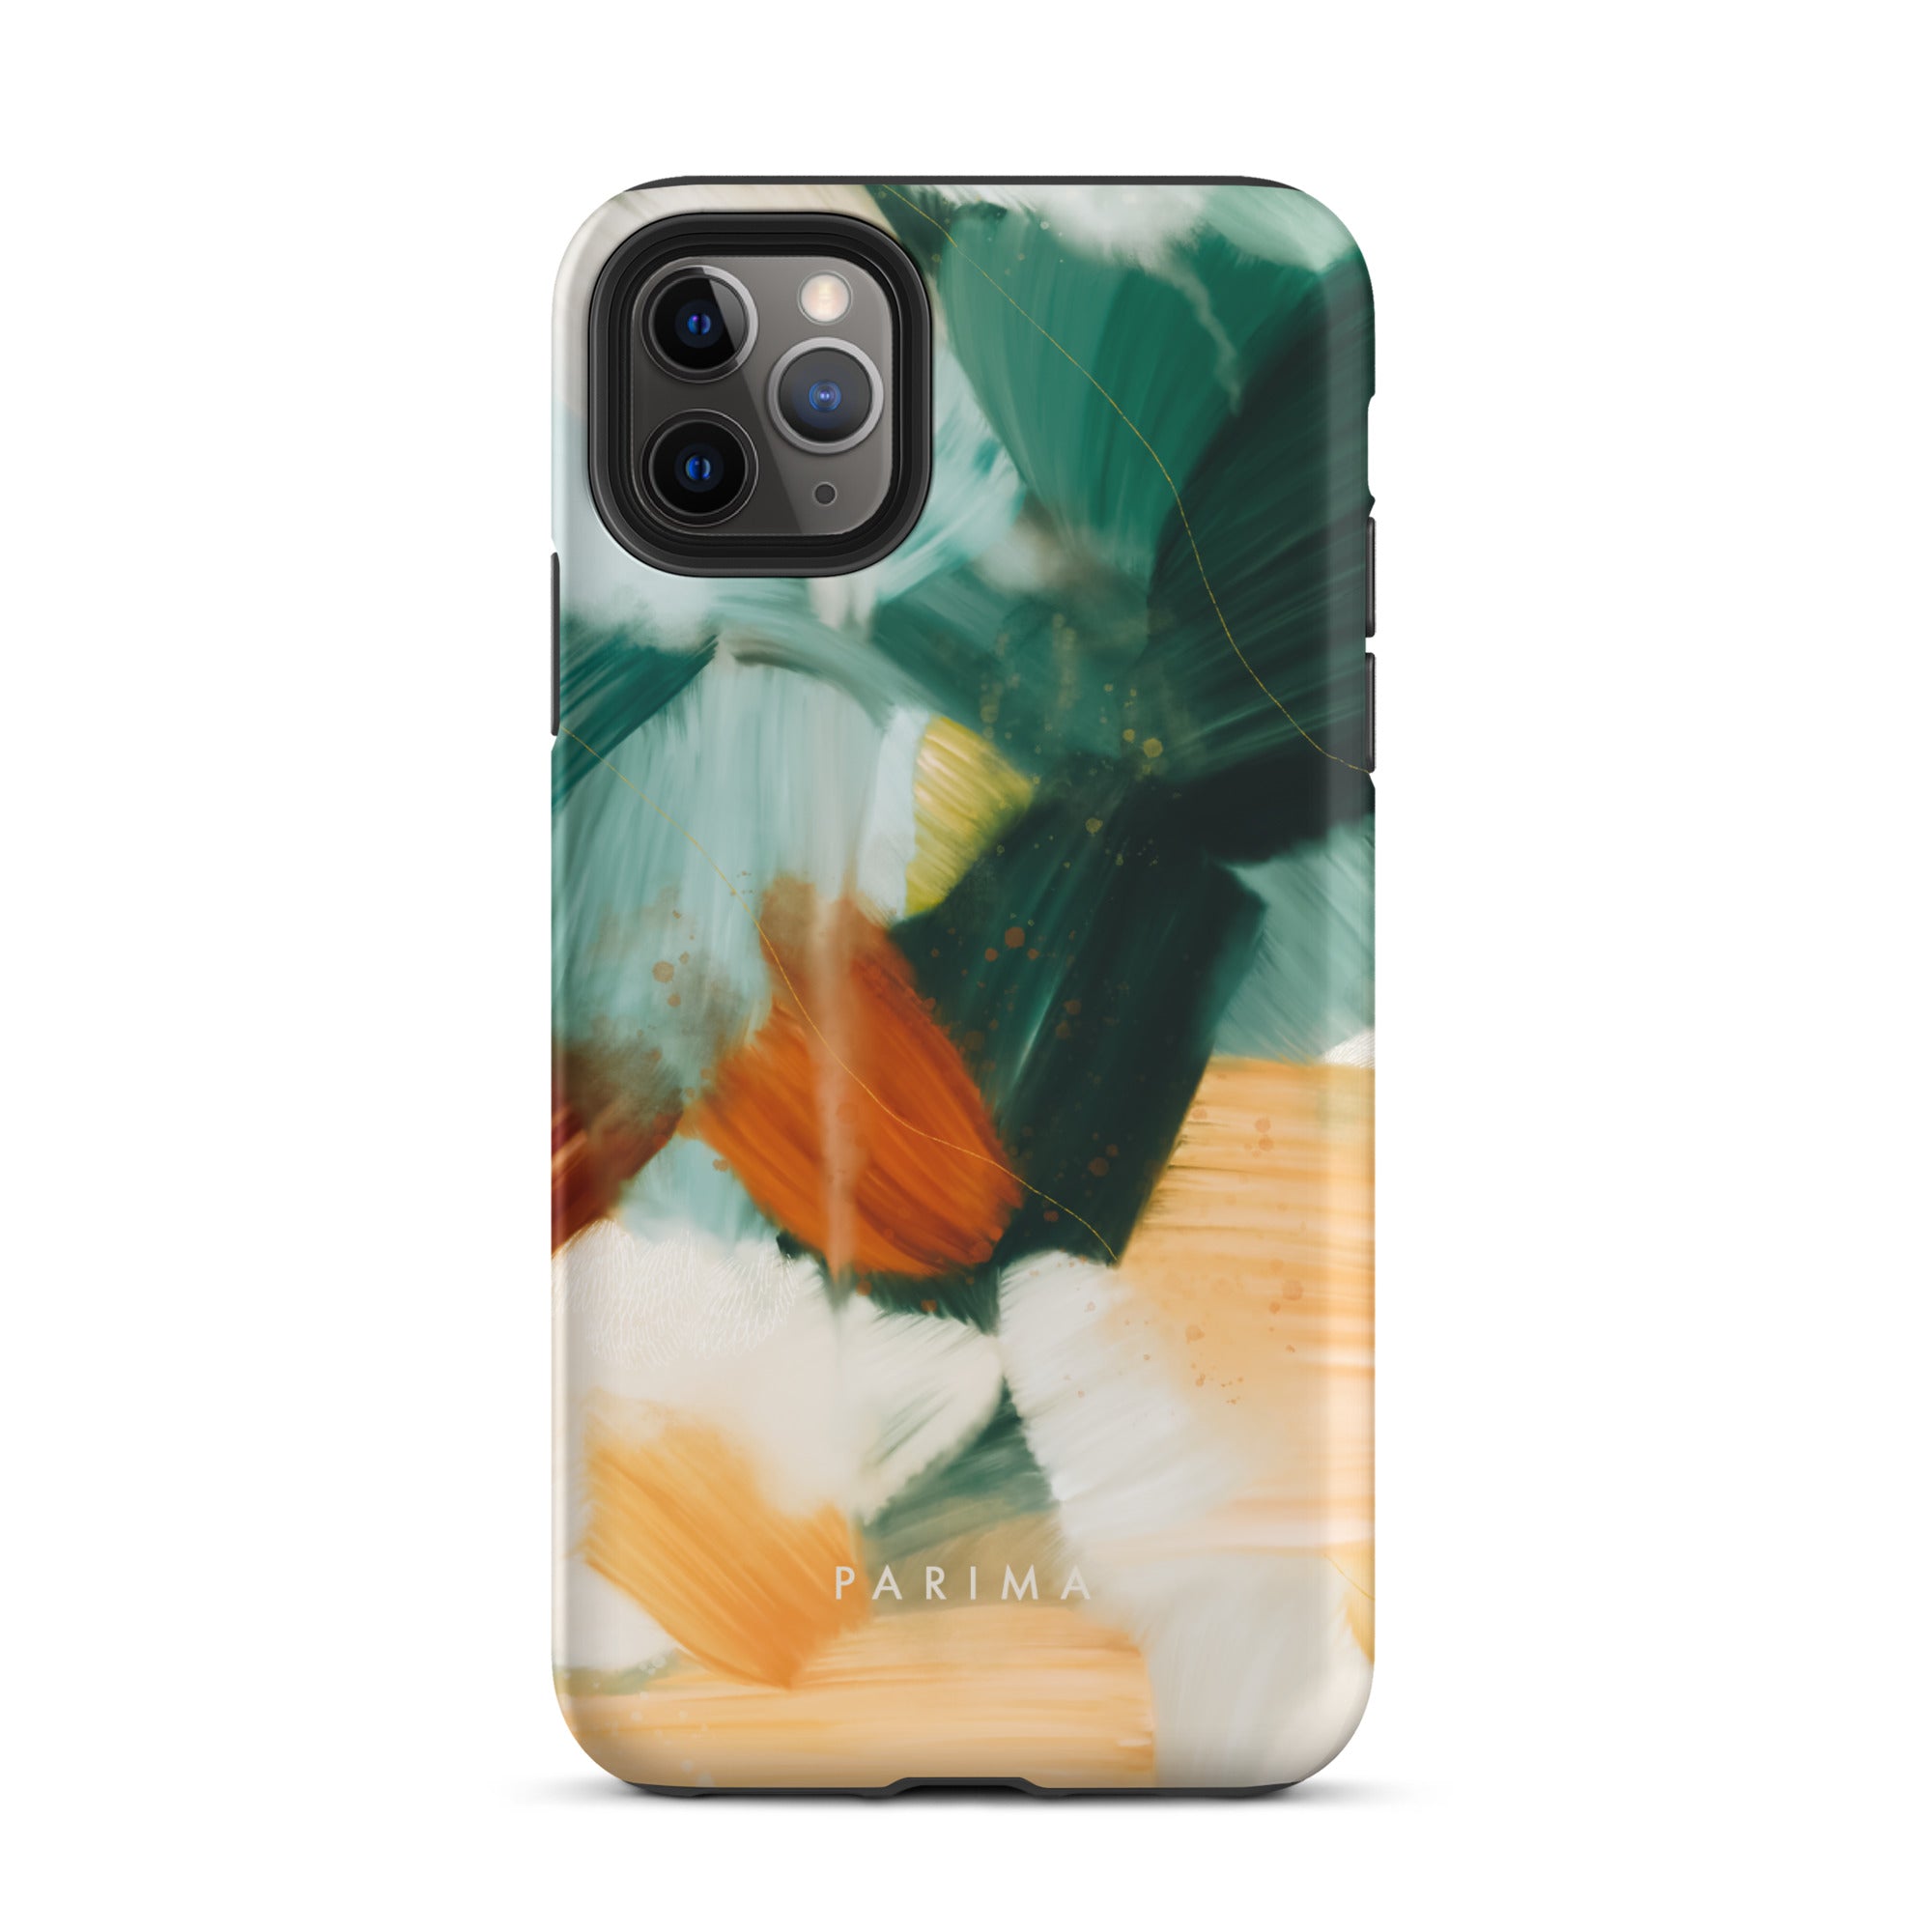 Meridian, green and orange abstract art on iPhone 11 Pro Max tough case by Parima Studio